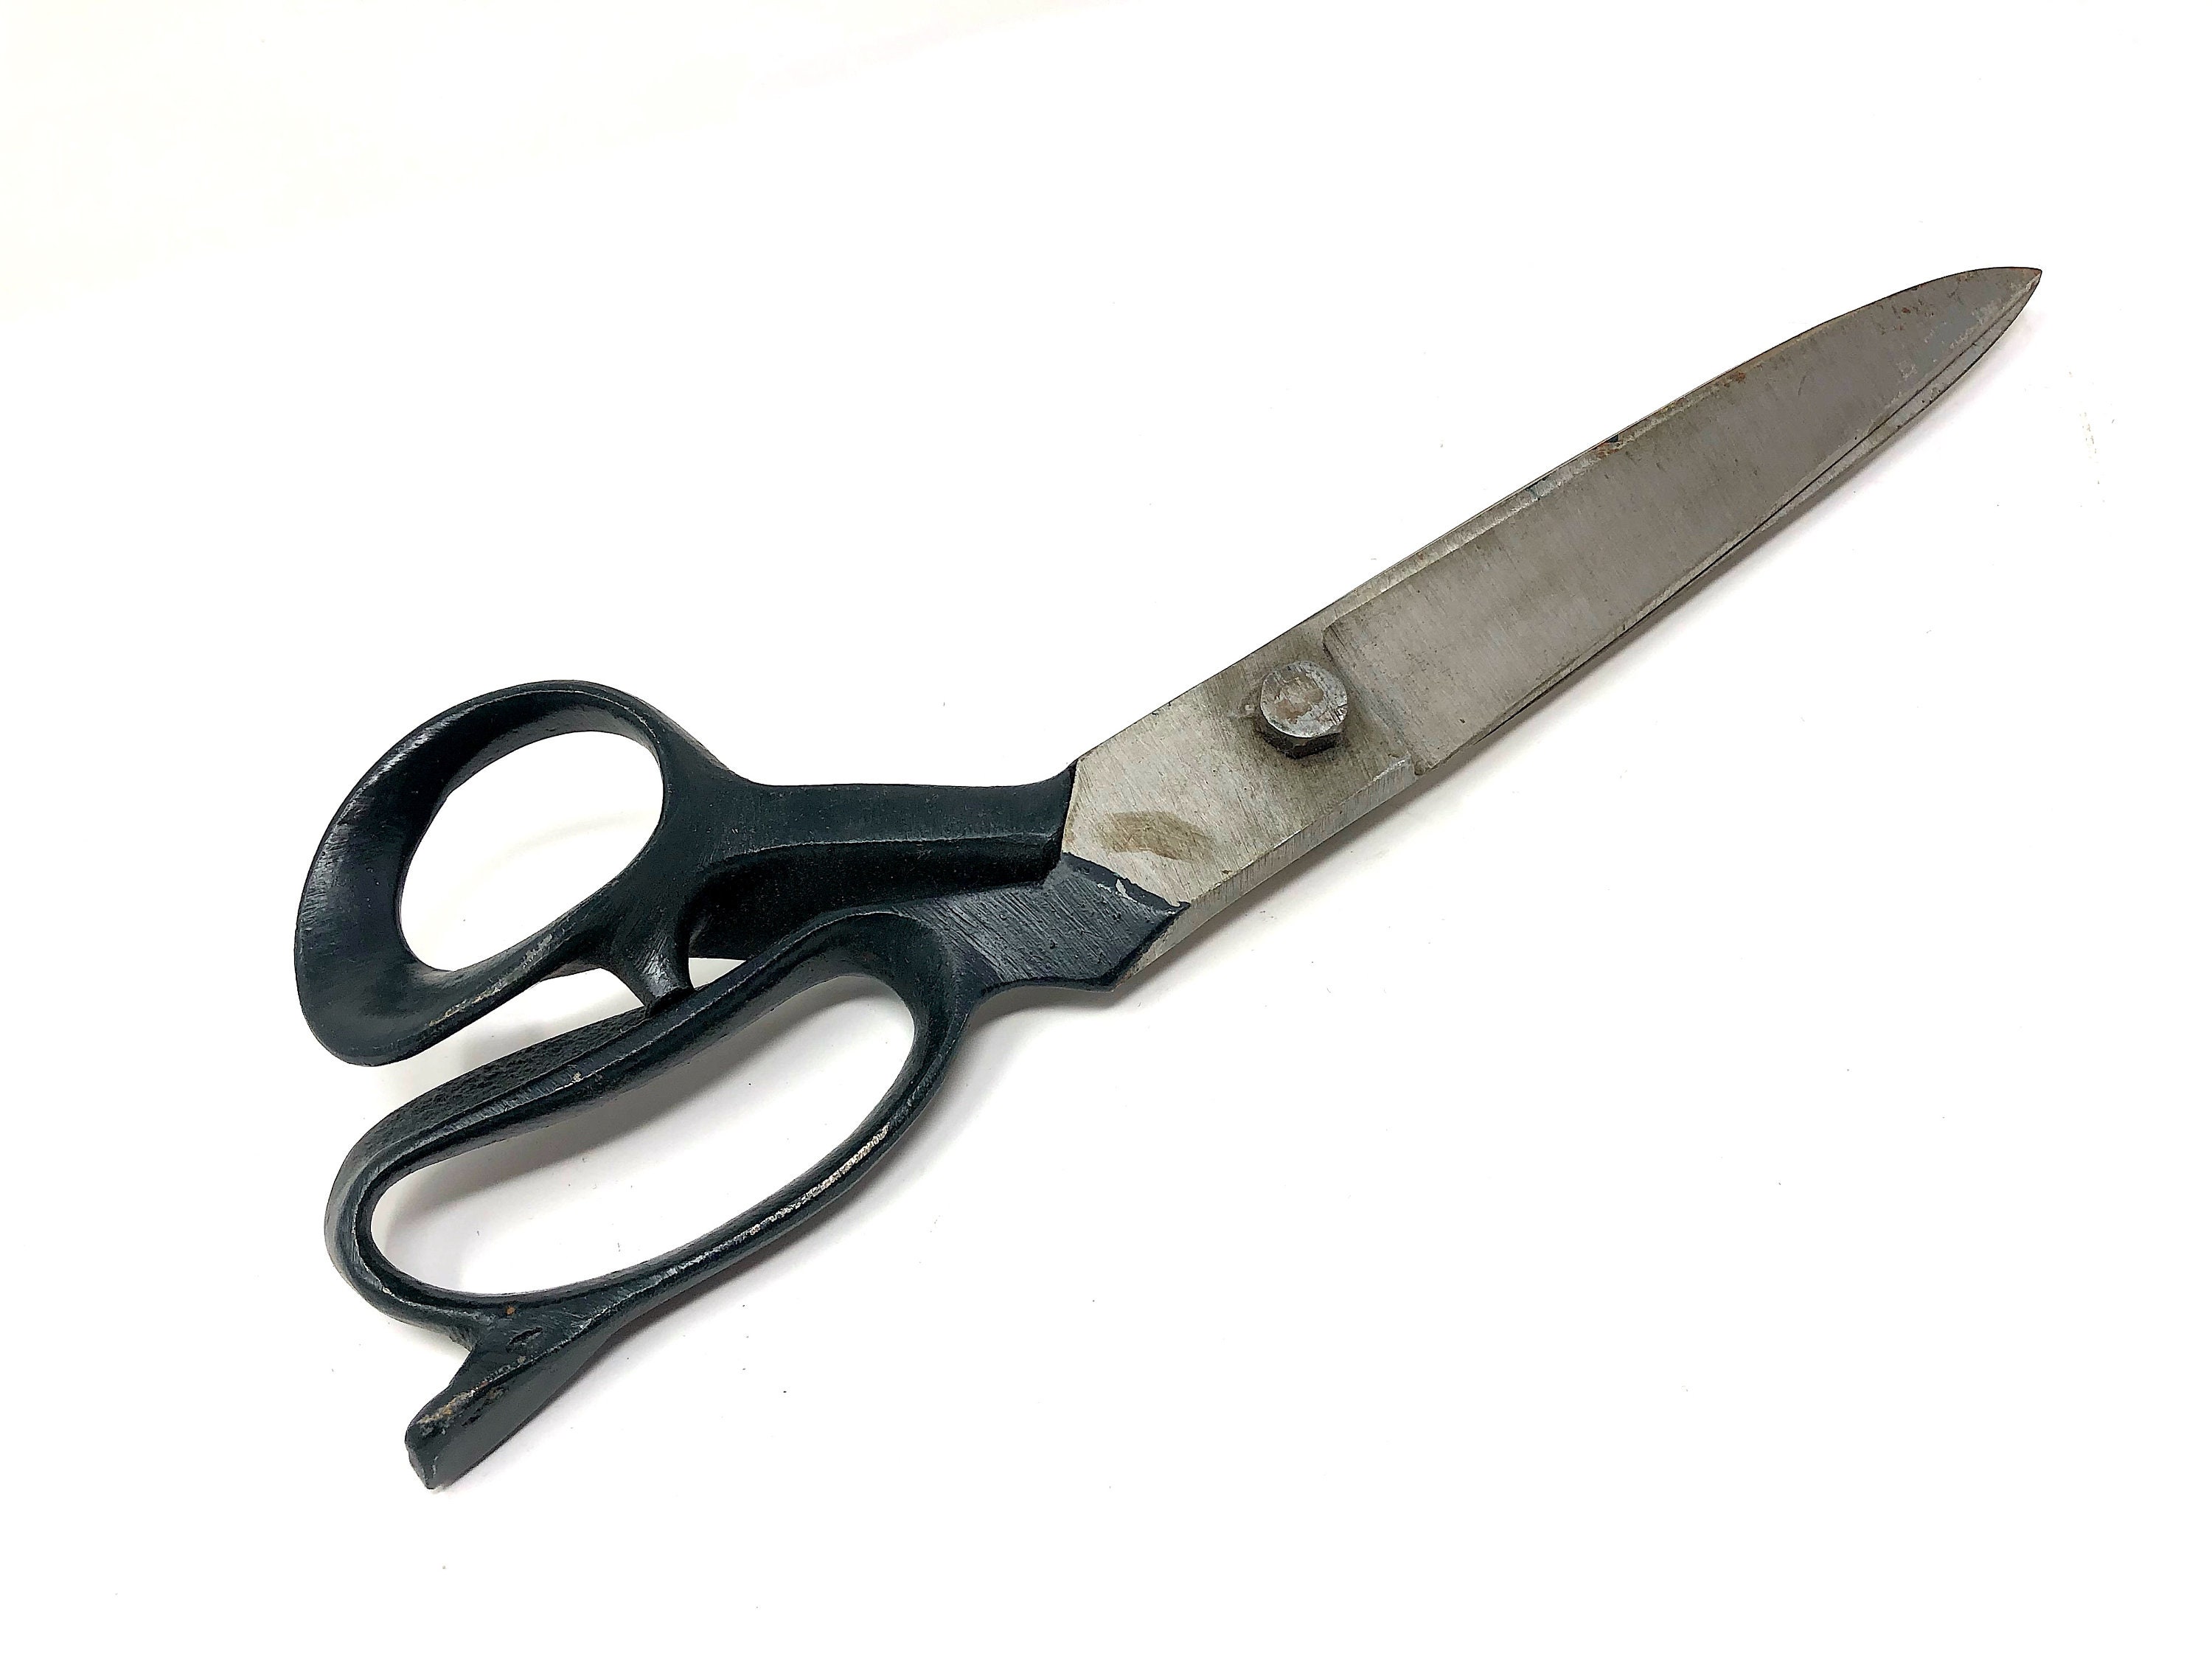 Really big scissors that I need to mount